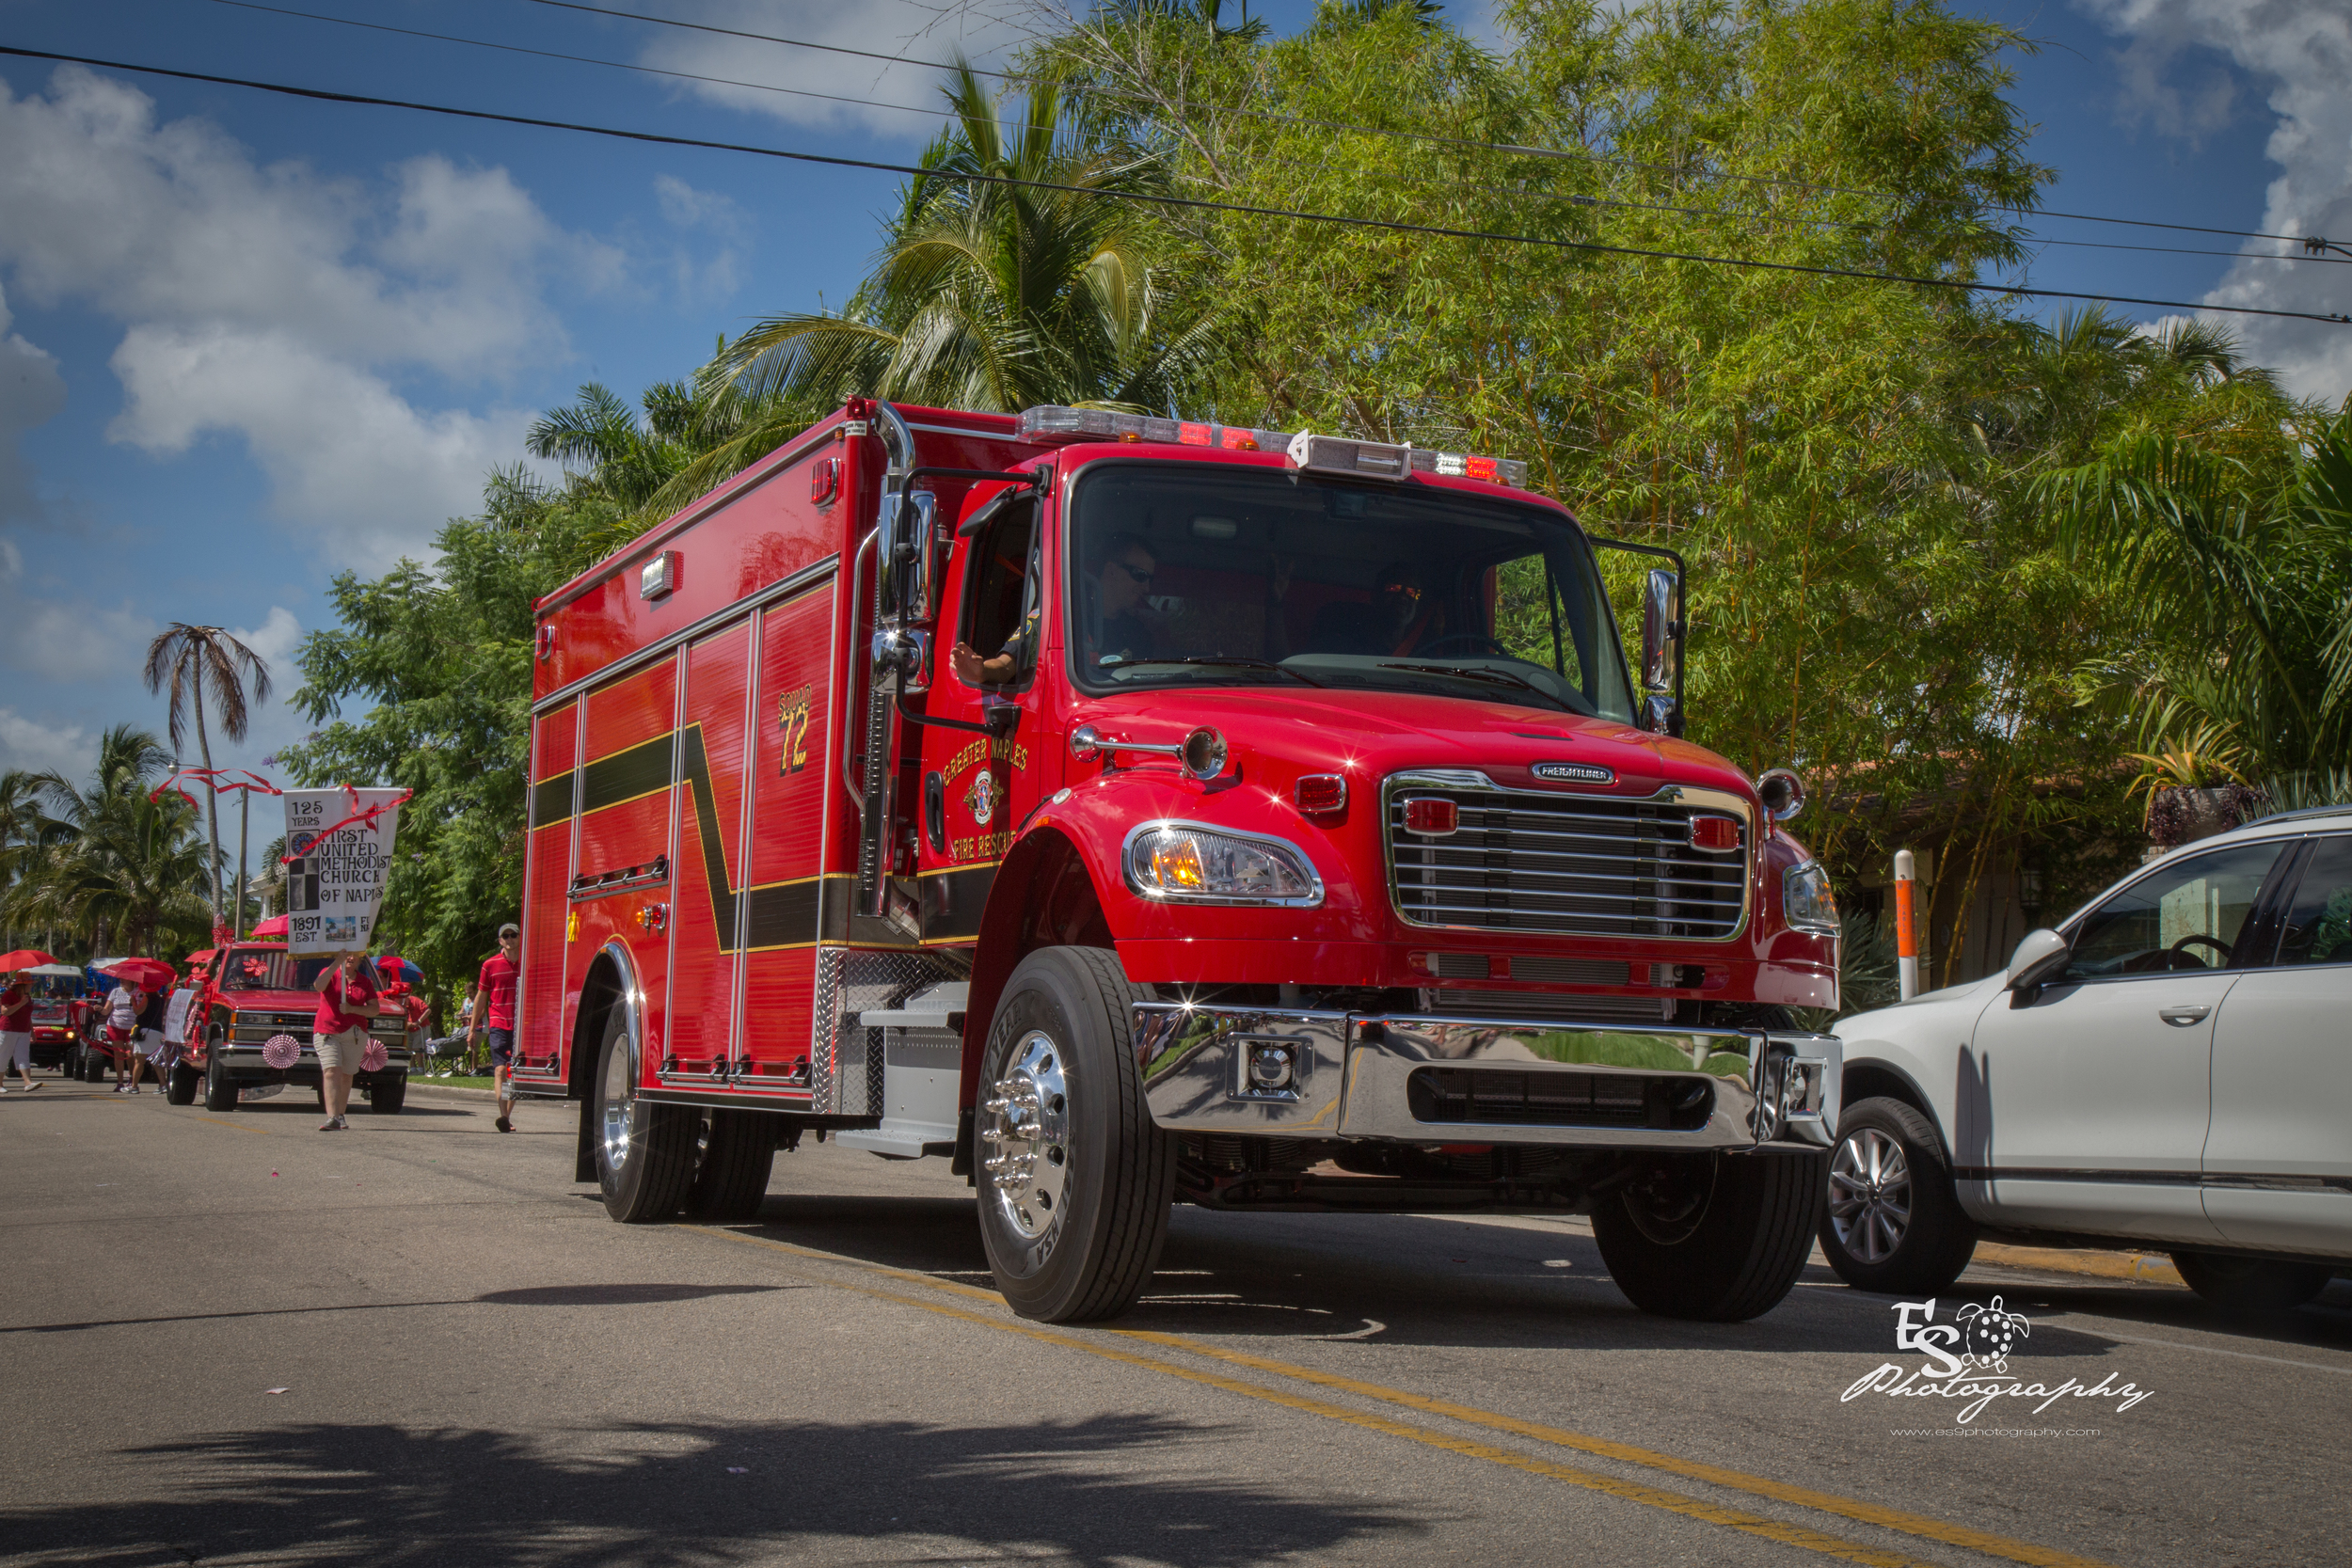 City of Naples July 4th Parade 2016 @ ES9 Photography 2016-211.jpg